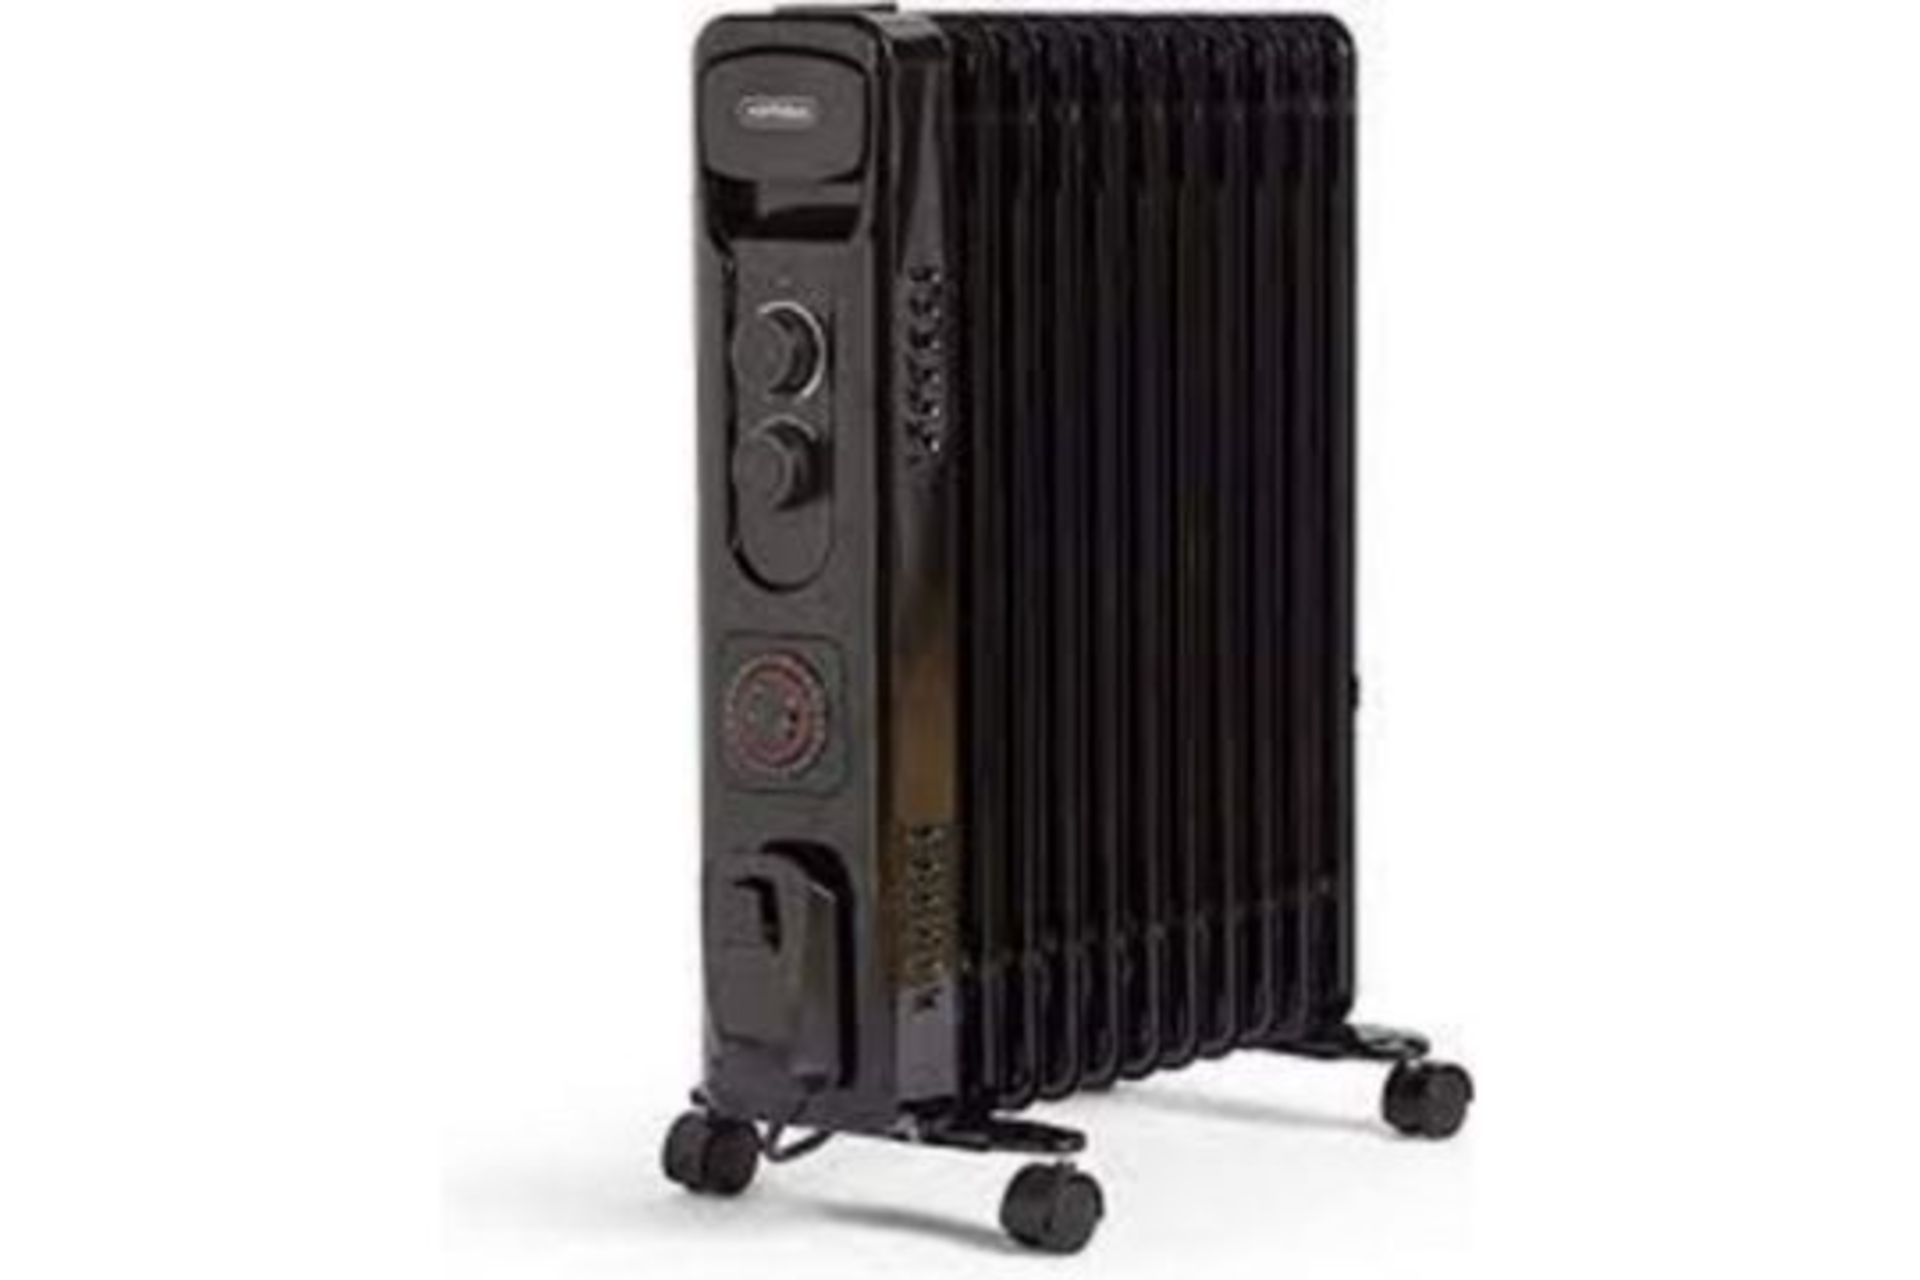 NEW BOXED 2500W 11 FIN OIL FILLED RADIATOR WITH TIMER IN BLACK. (REF047-ROW15RACK)